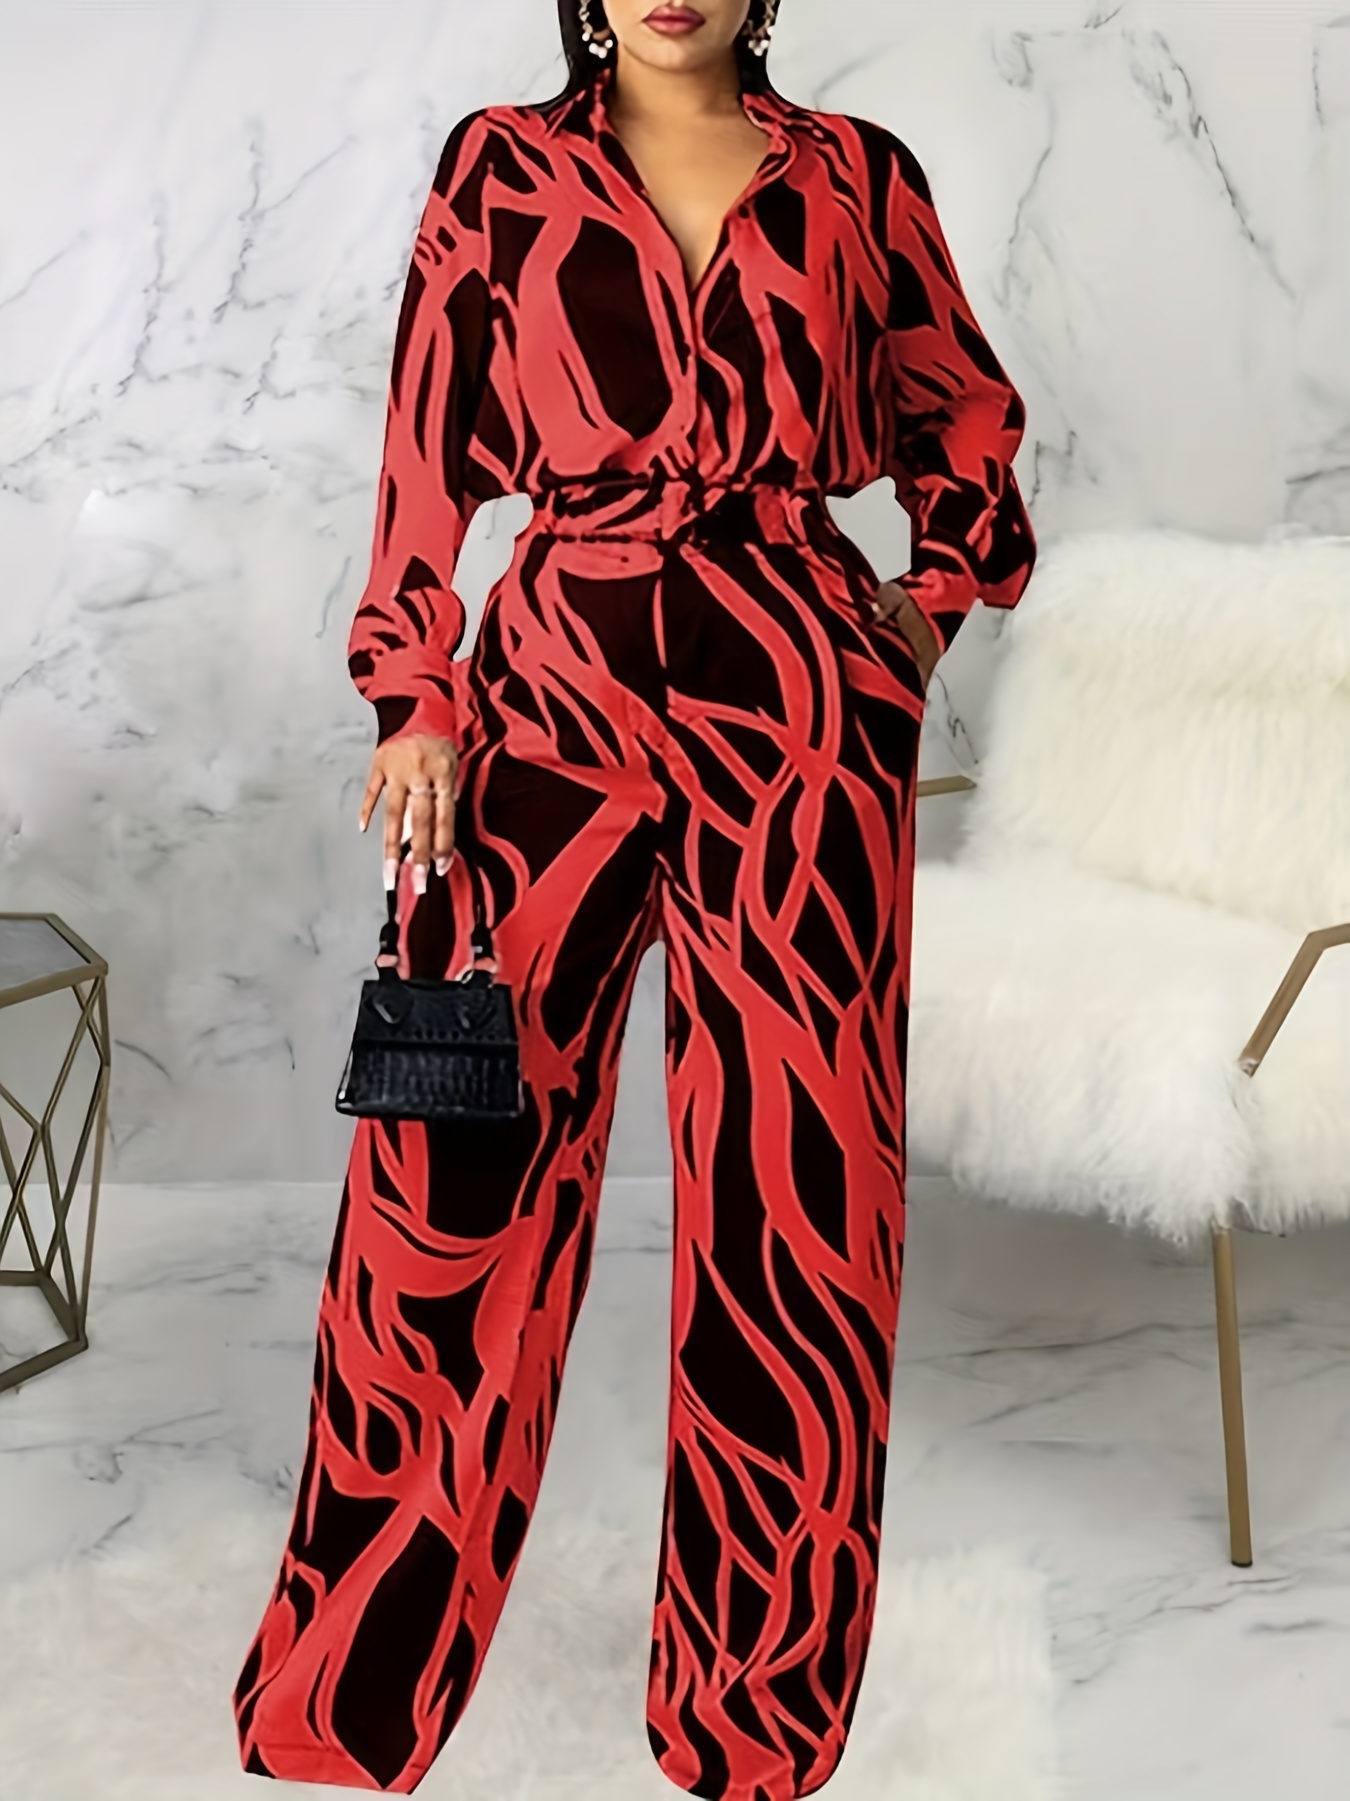 St. John Collection Pantsuit - Red, 12 Rise Suits and Sets, Clothing -  SJCTJ55820